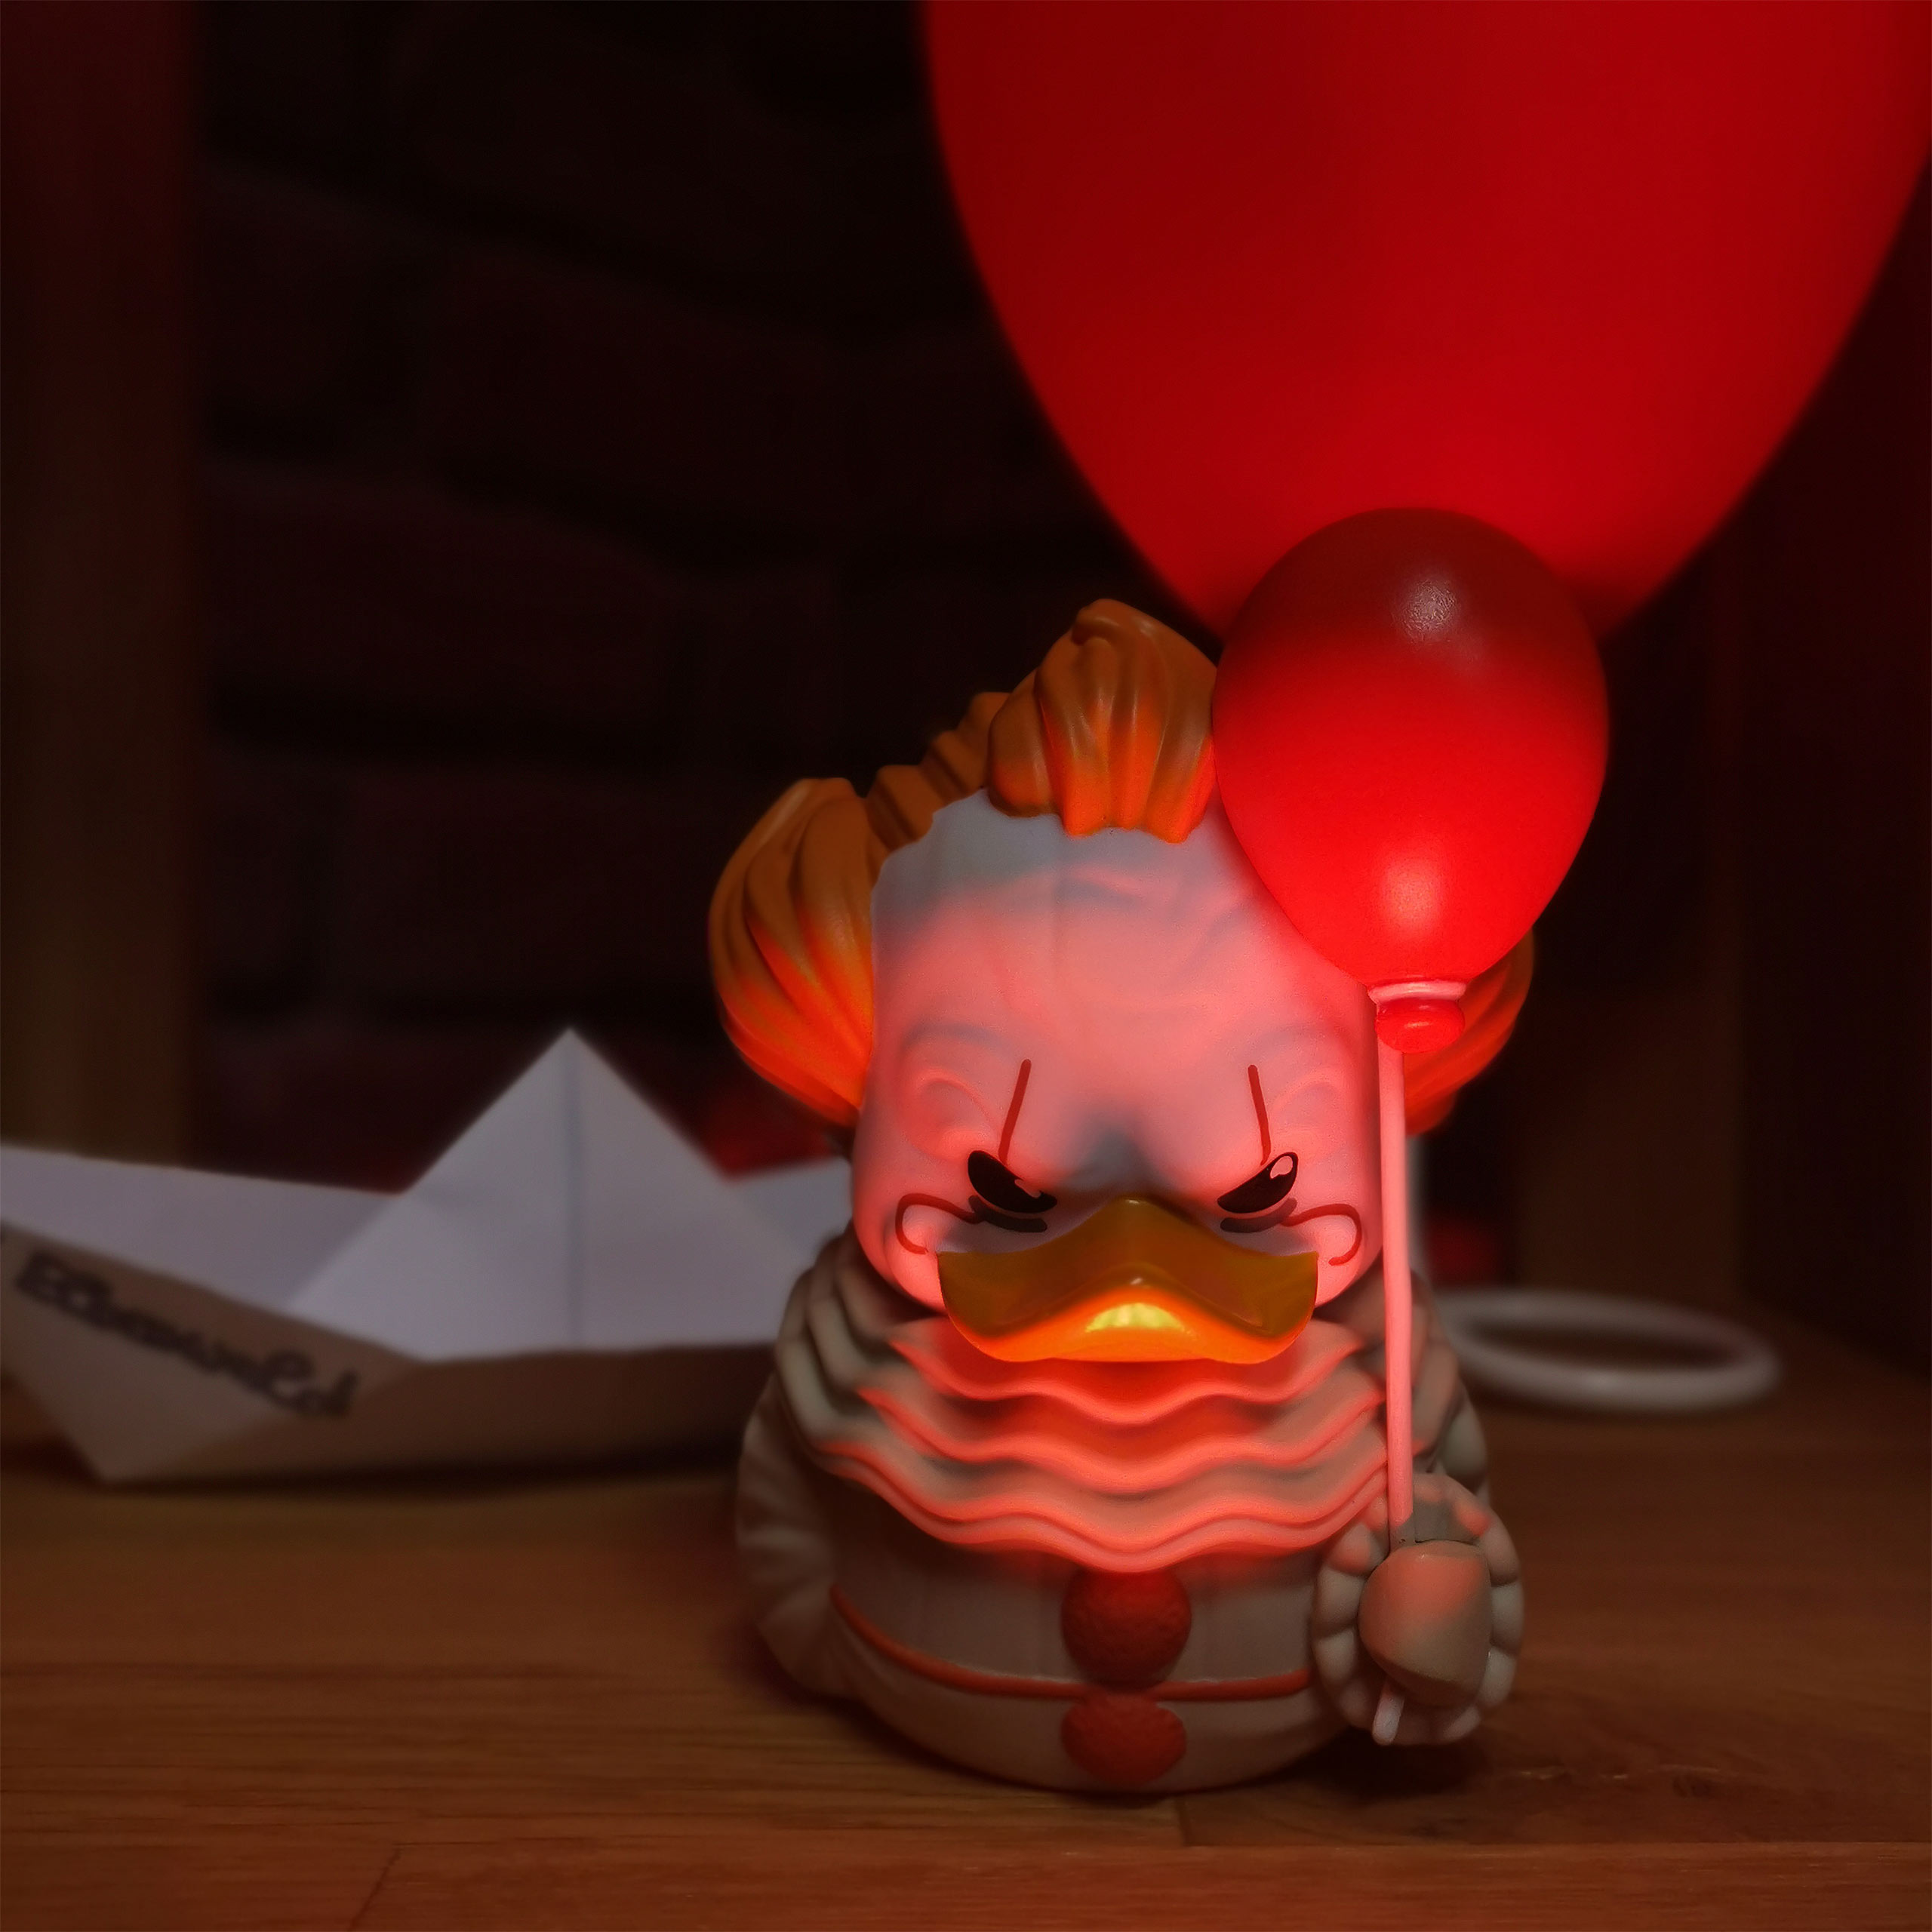 Stephen King's IT - Pennywise TUBBZ Decorative Duck